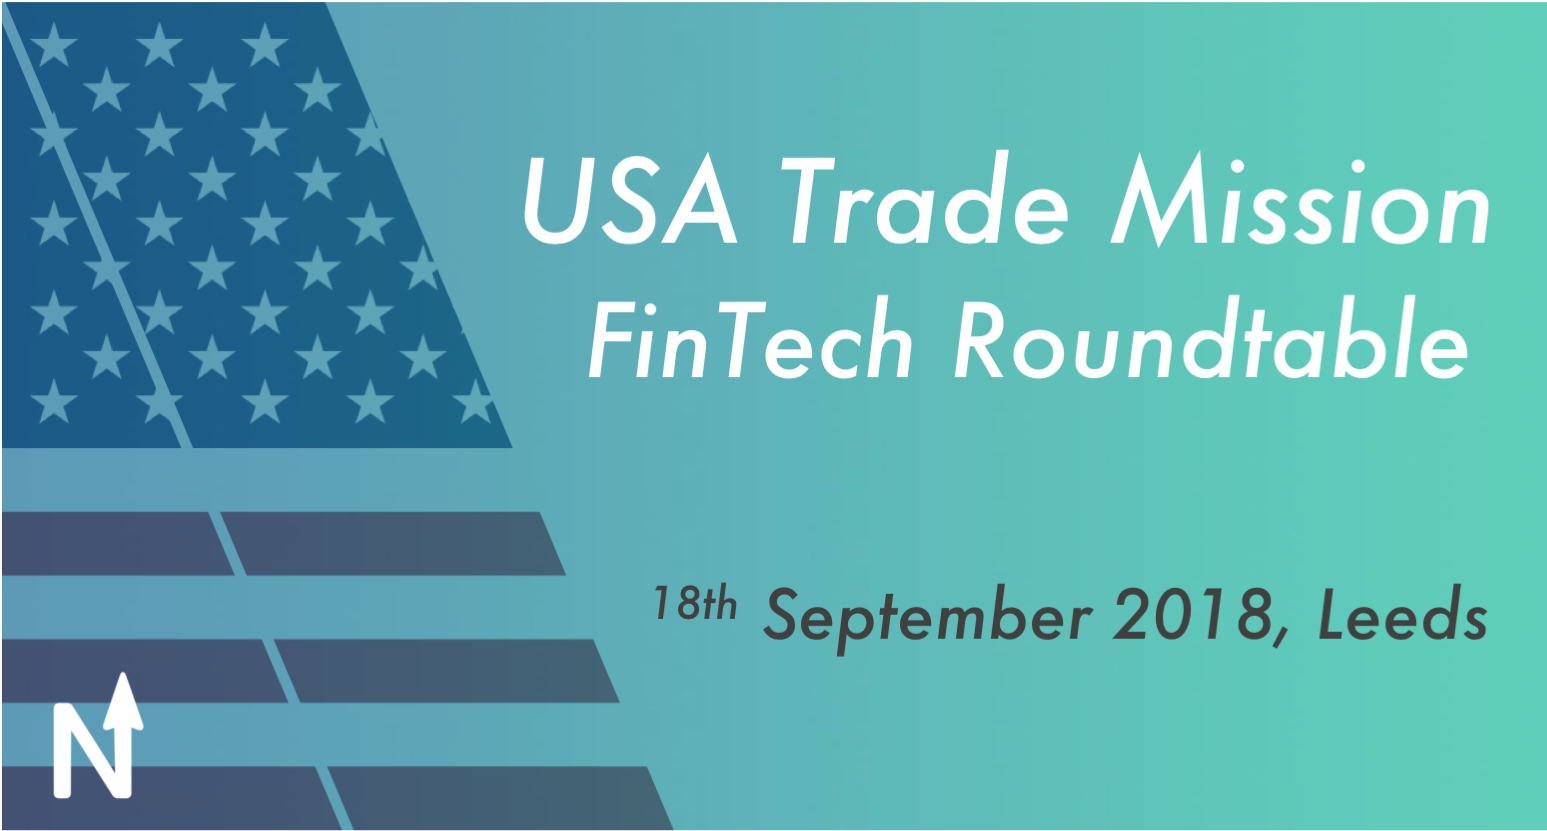 FinTech North to host US trade mission roundtable